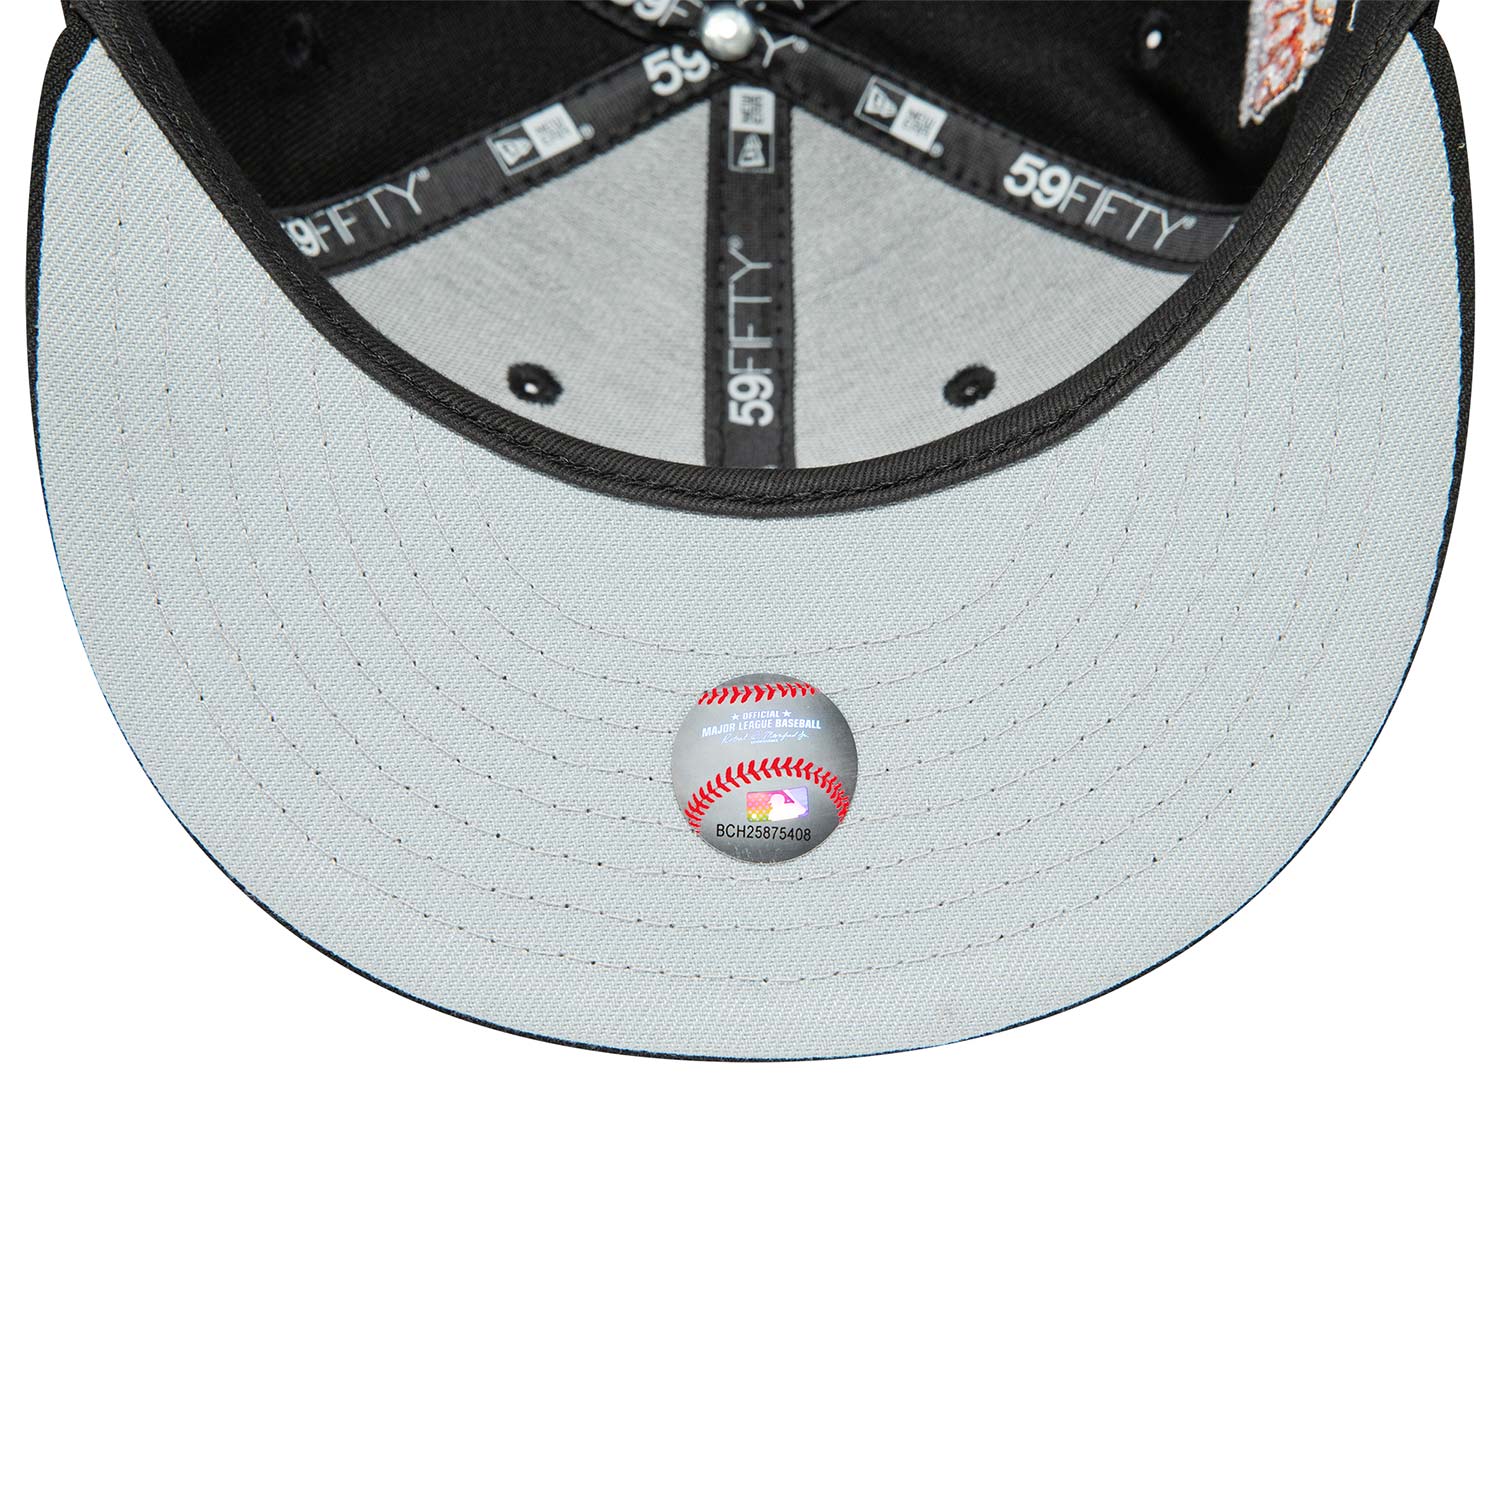 San Francisco Giants 50th Anniversary Black 59FIFTY Fitted Cap